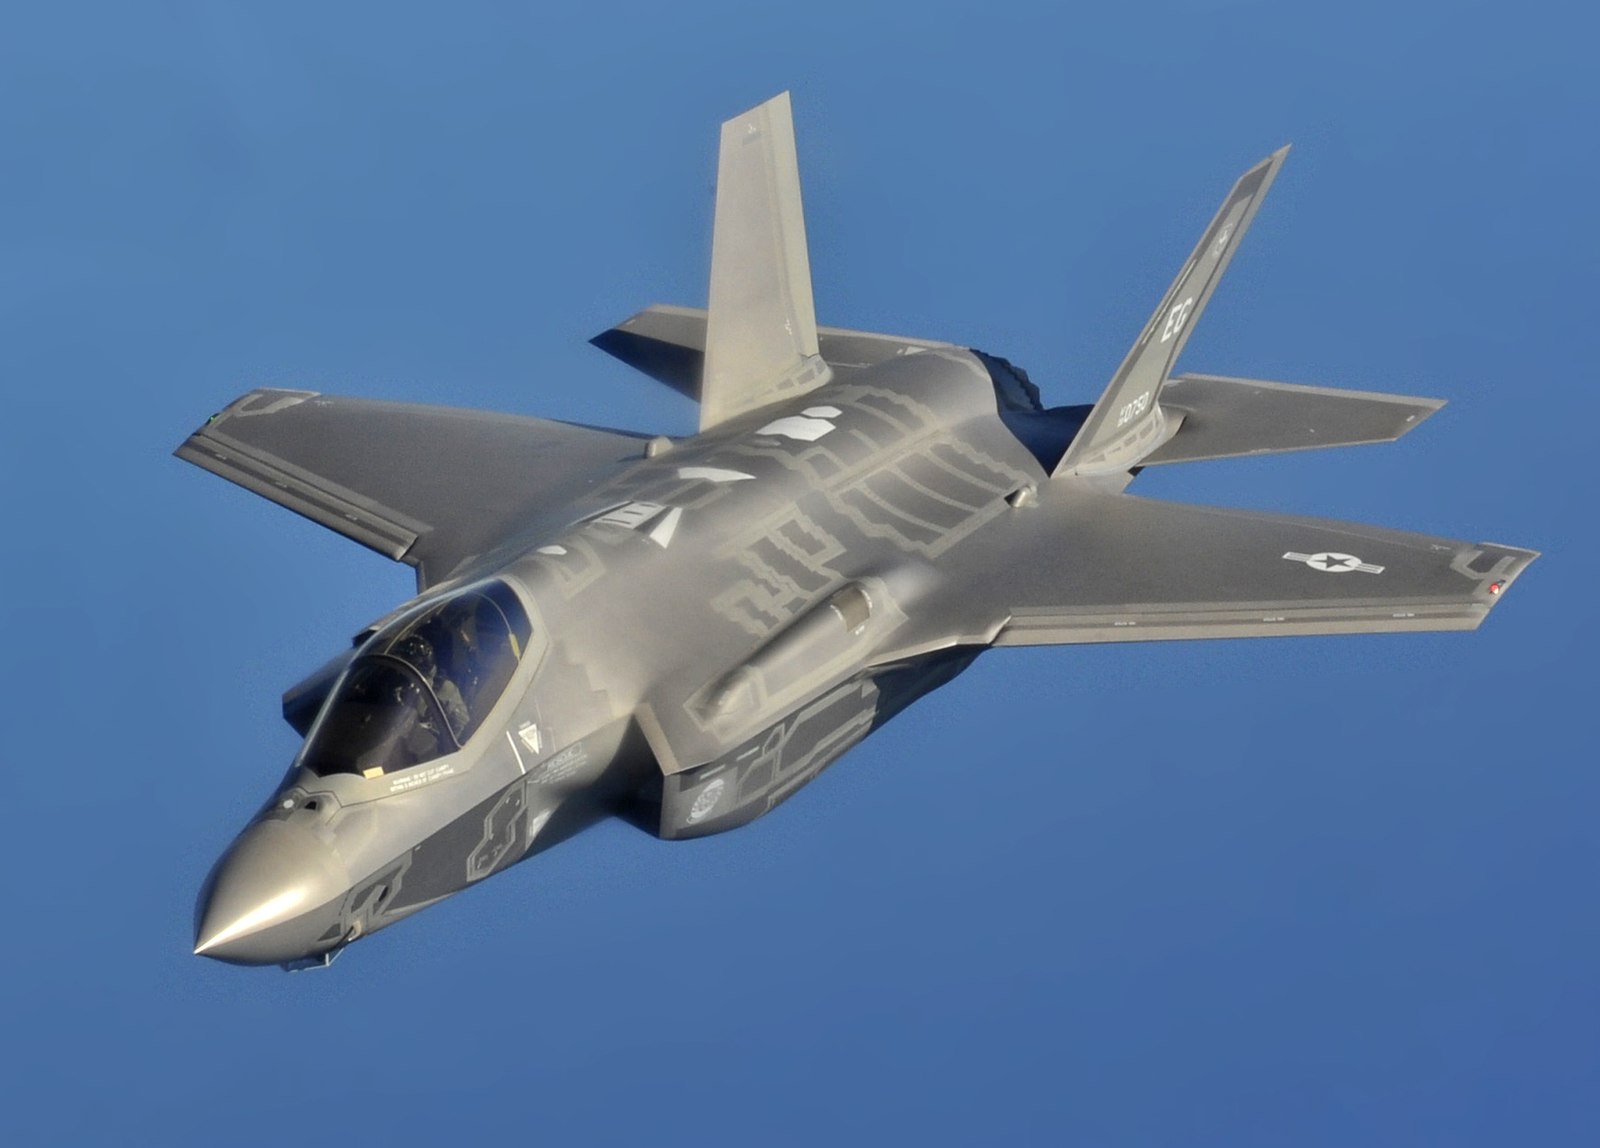 Aerospace company Lockheed Martin is known for making some of the fastest fighters, including this U.S. Air Force F-35A Lightning II Joint Strike Fighter from the 58th Fighter Squadron.